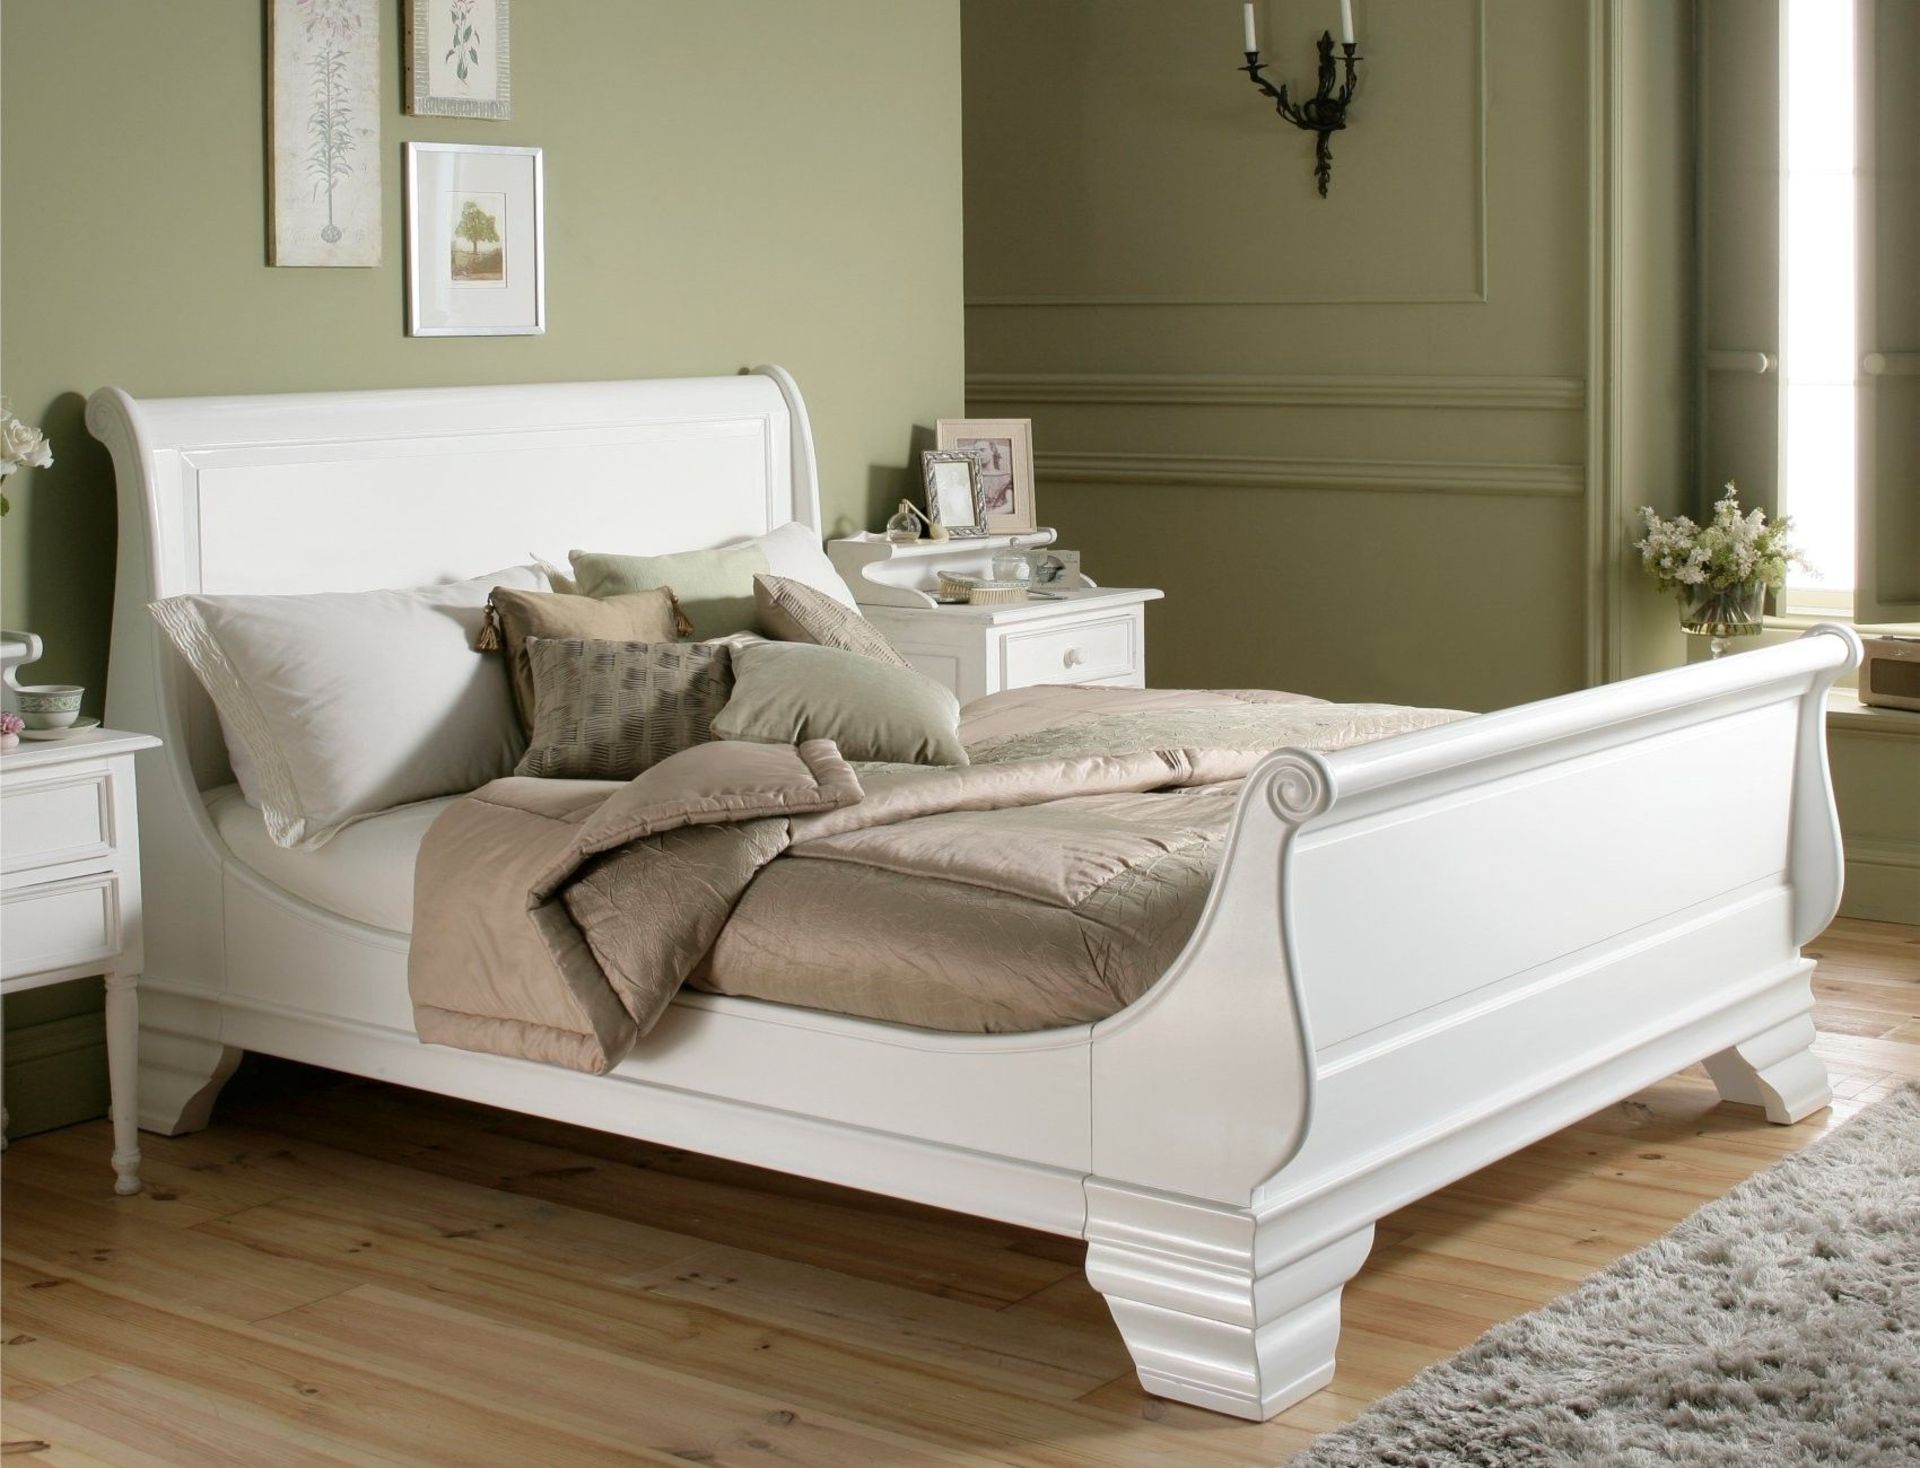 New Dunelm 5ft Sleigh Bed (3 boxes with NO Screws & Slats) - RRP £799.